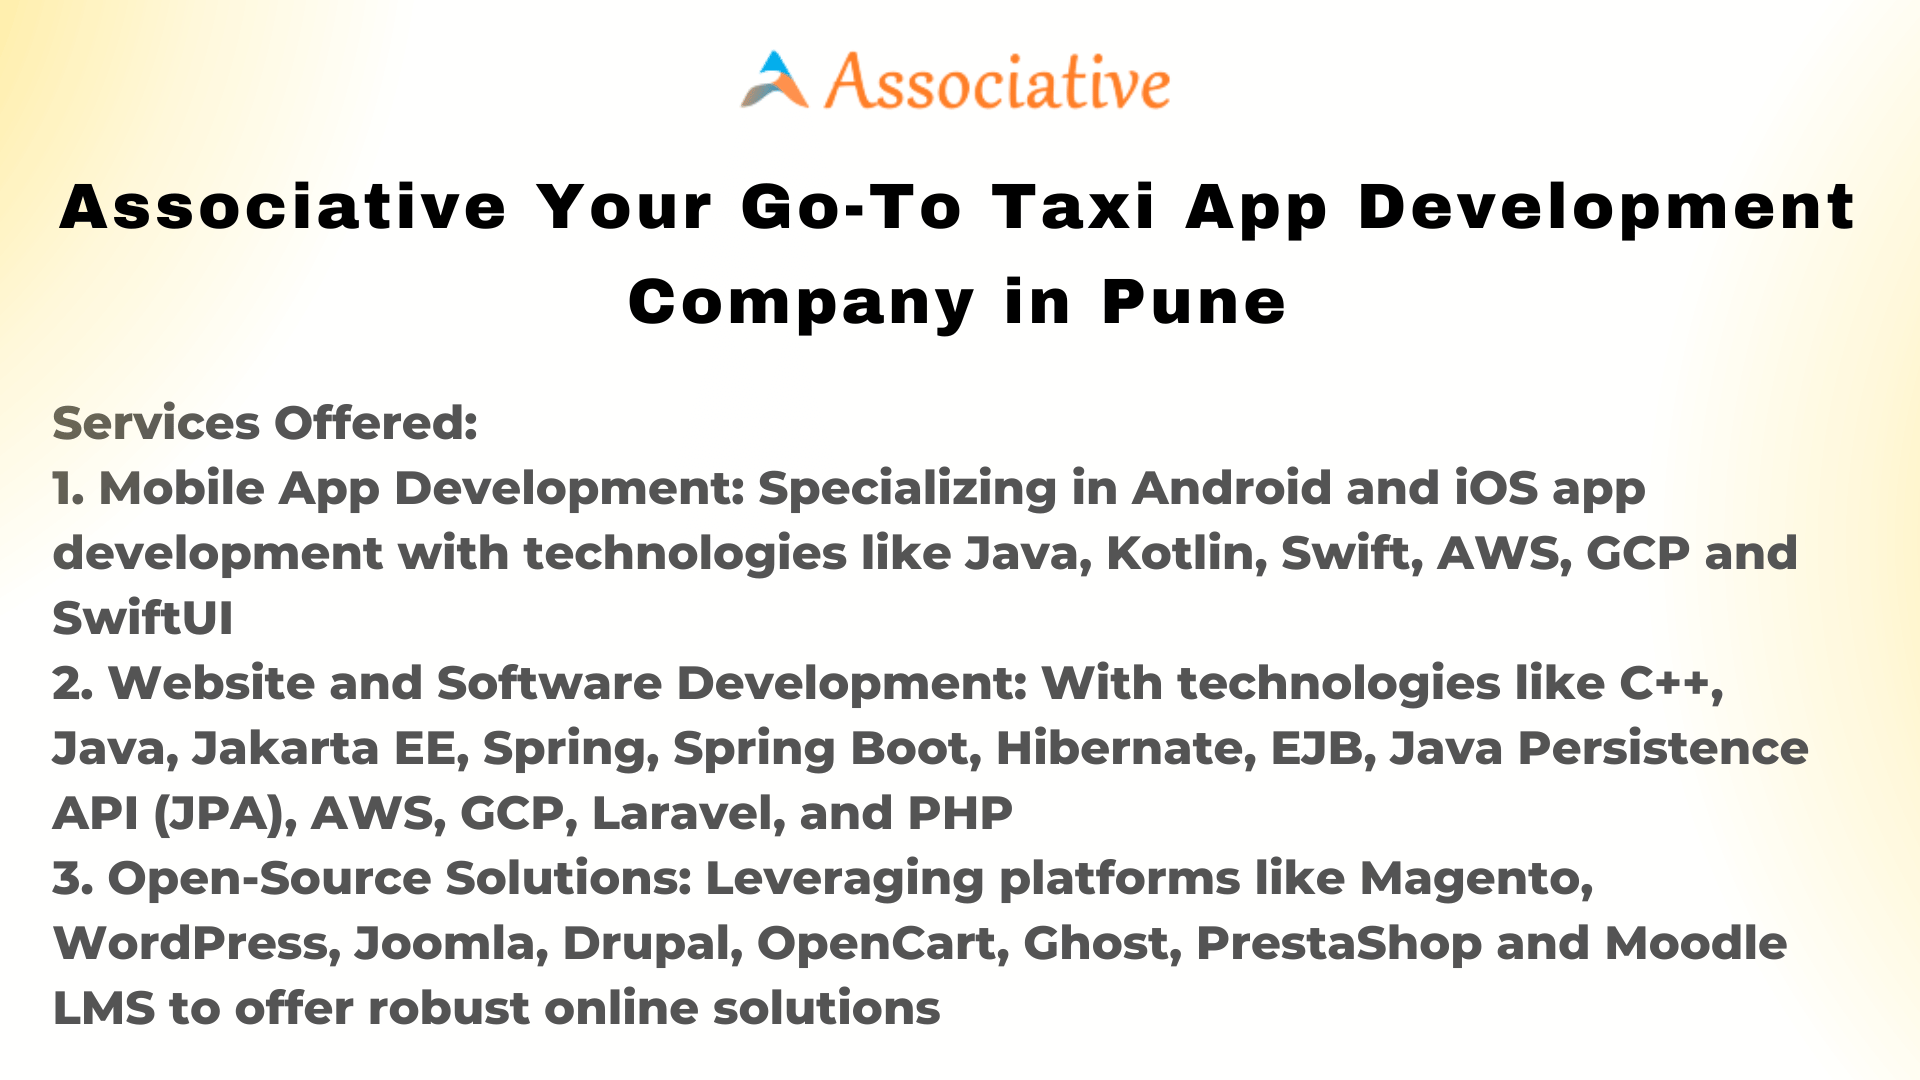 Associative Your Go-To Taxi App Development Company in Pune